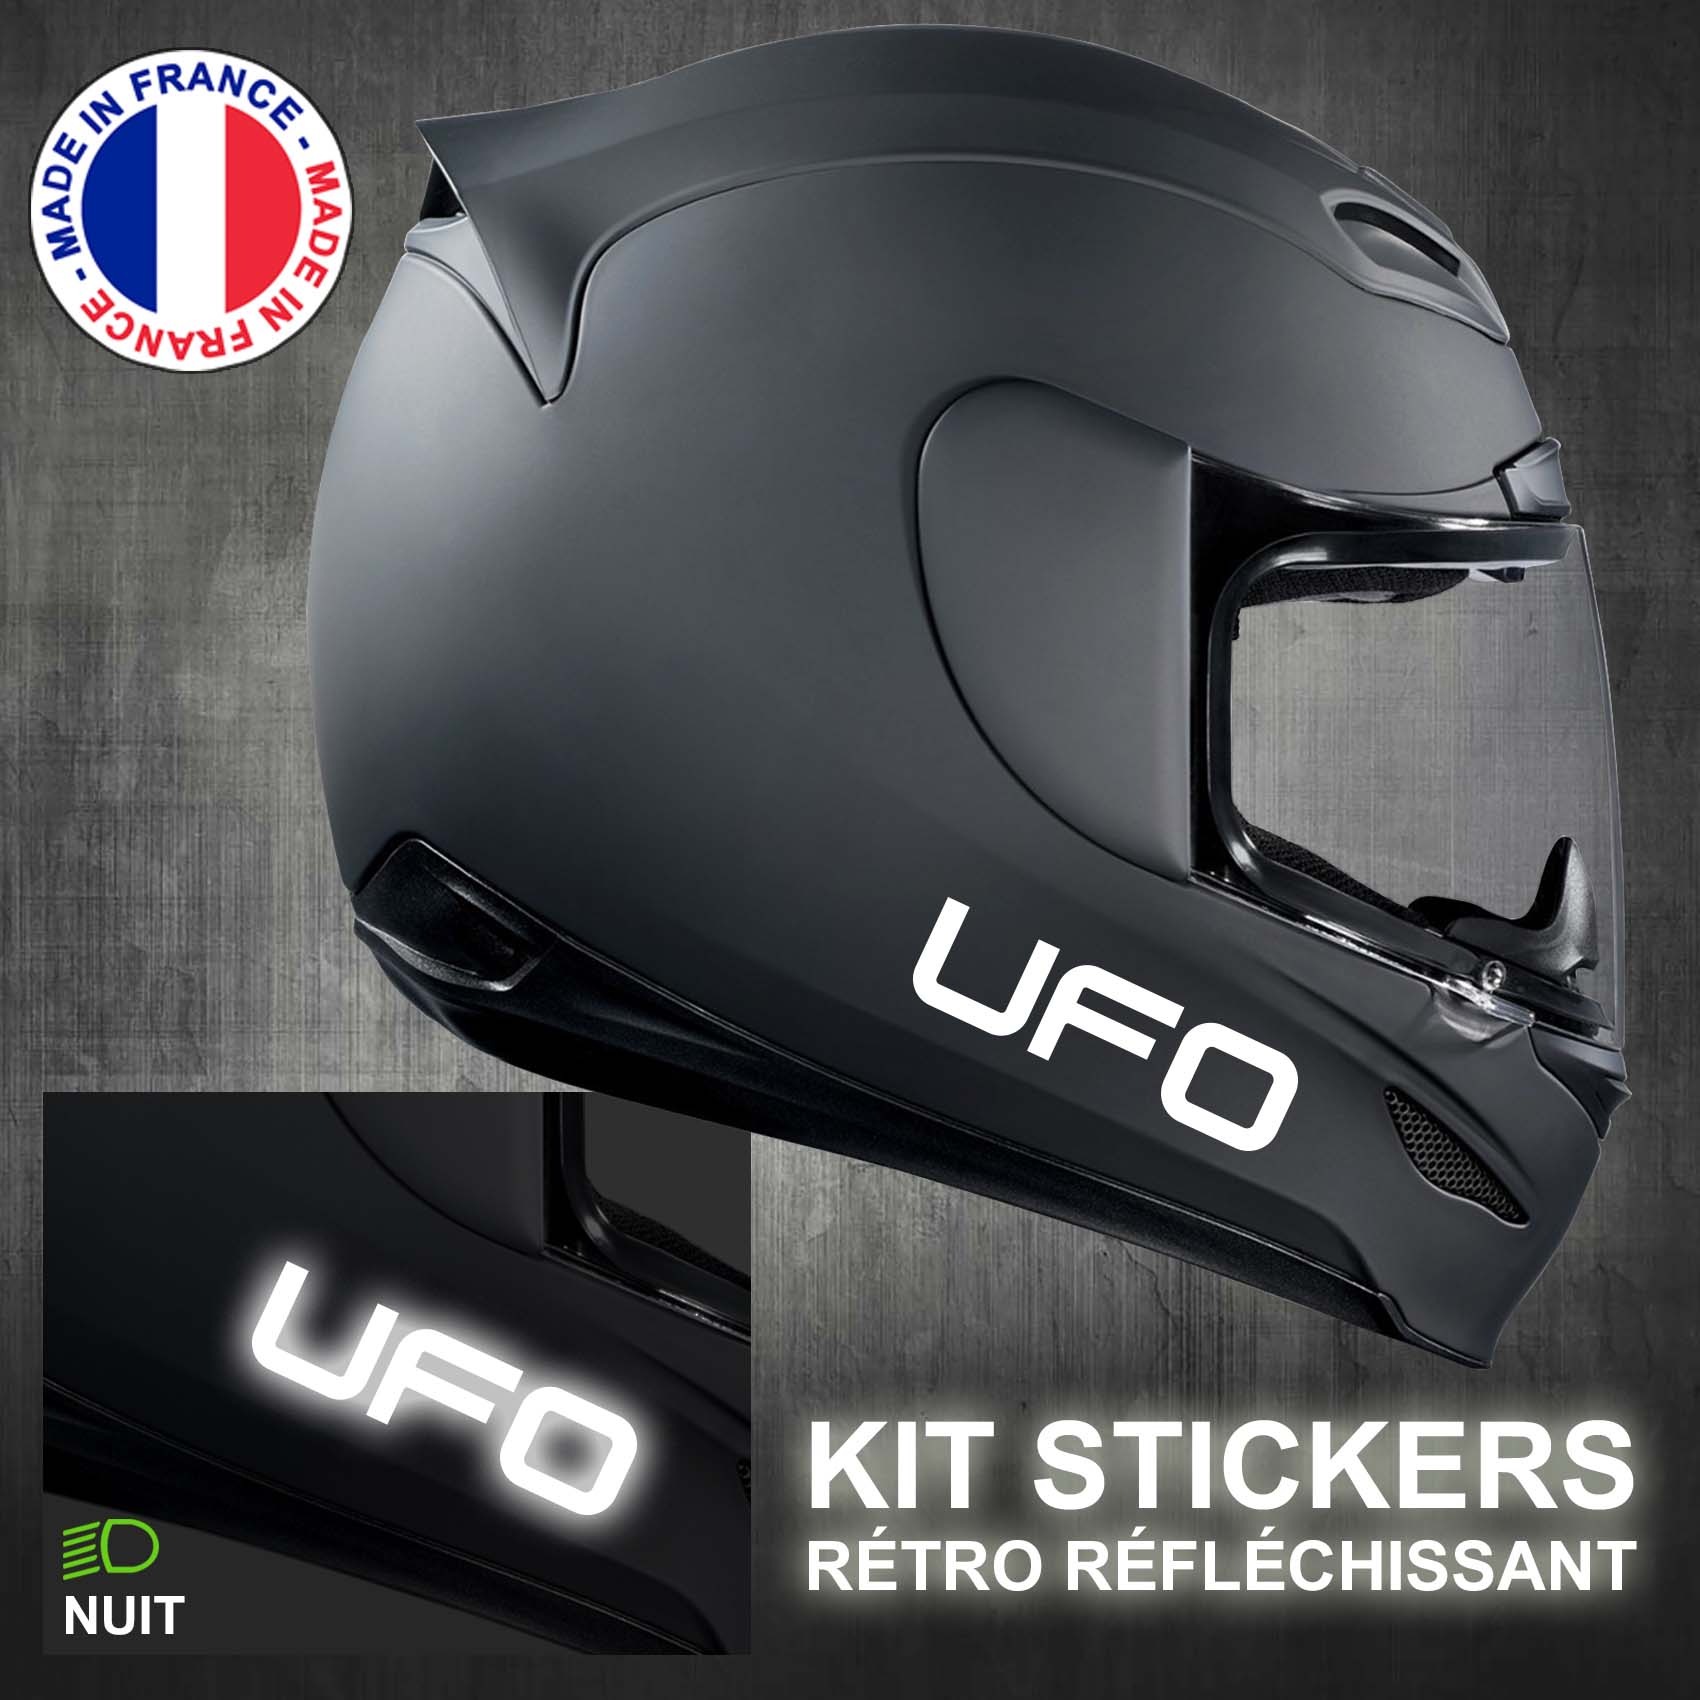 stickers-casque-moto-ufo-ref2-retro-reflechissant-autocollant-noir-moto-velo-tuning-racing-route-sticker-casques-adhesif-scooter-nuit-securite-decals-personnalise-personnalisable-min